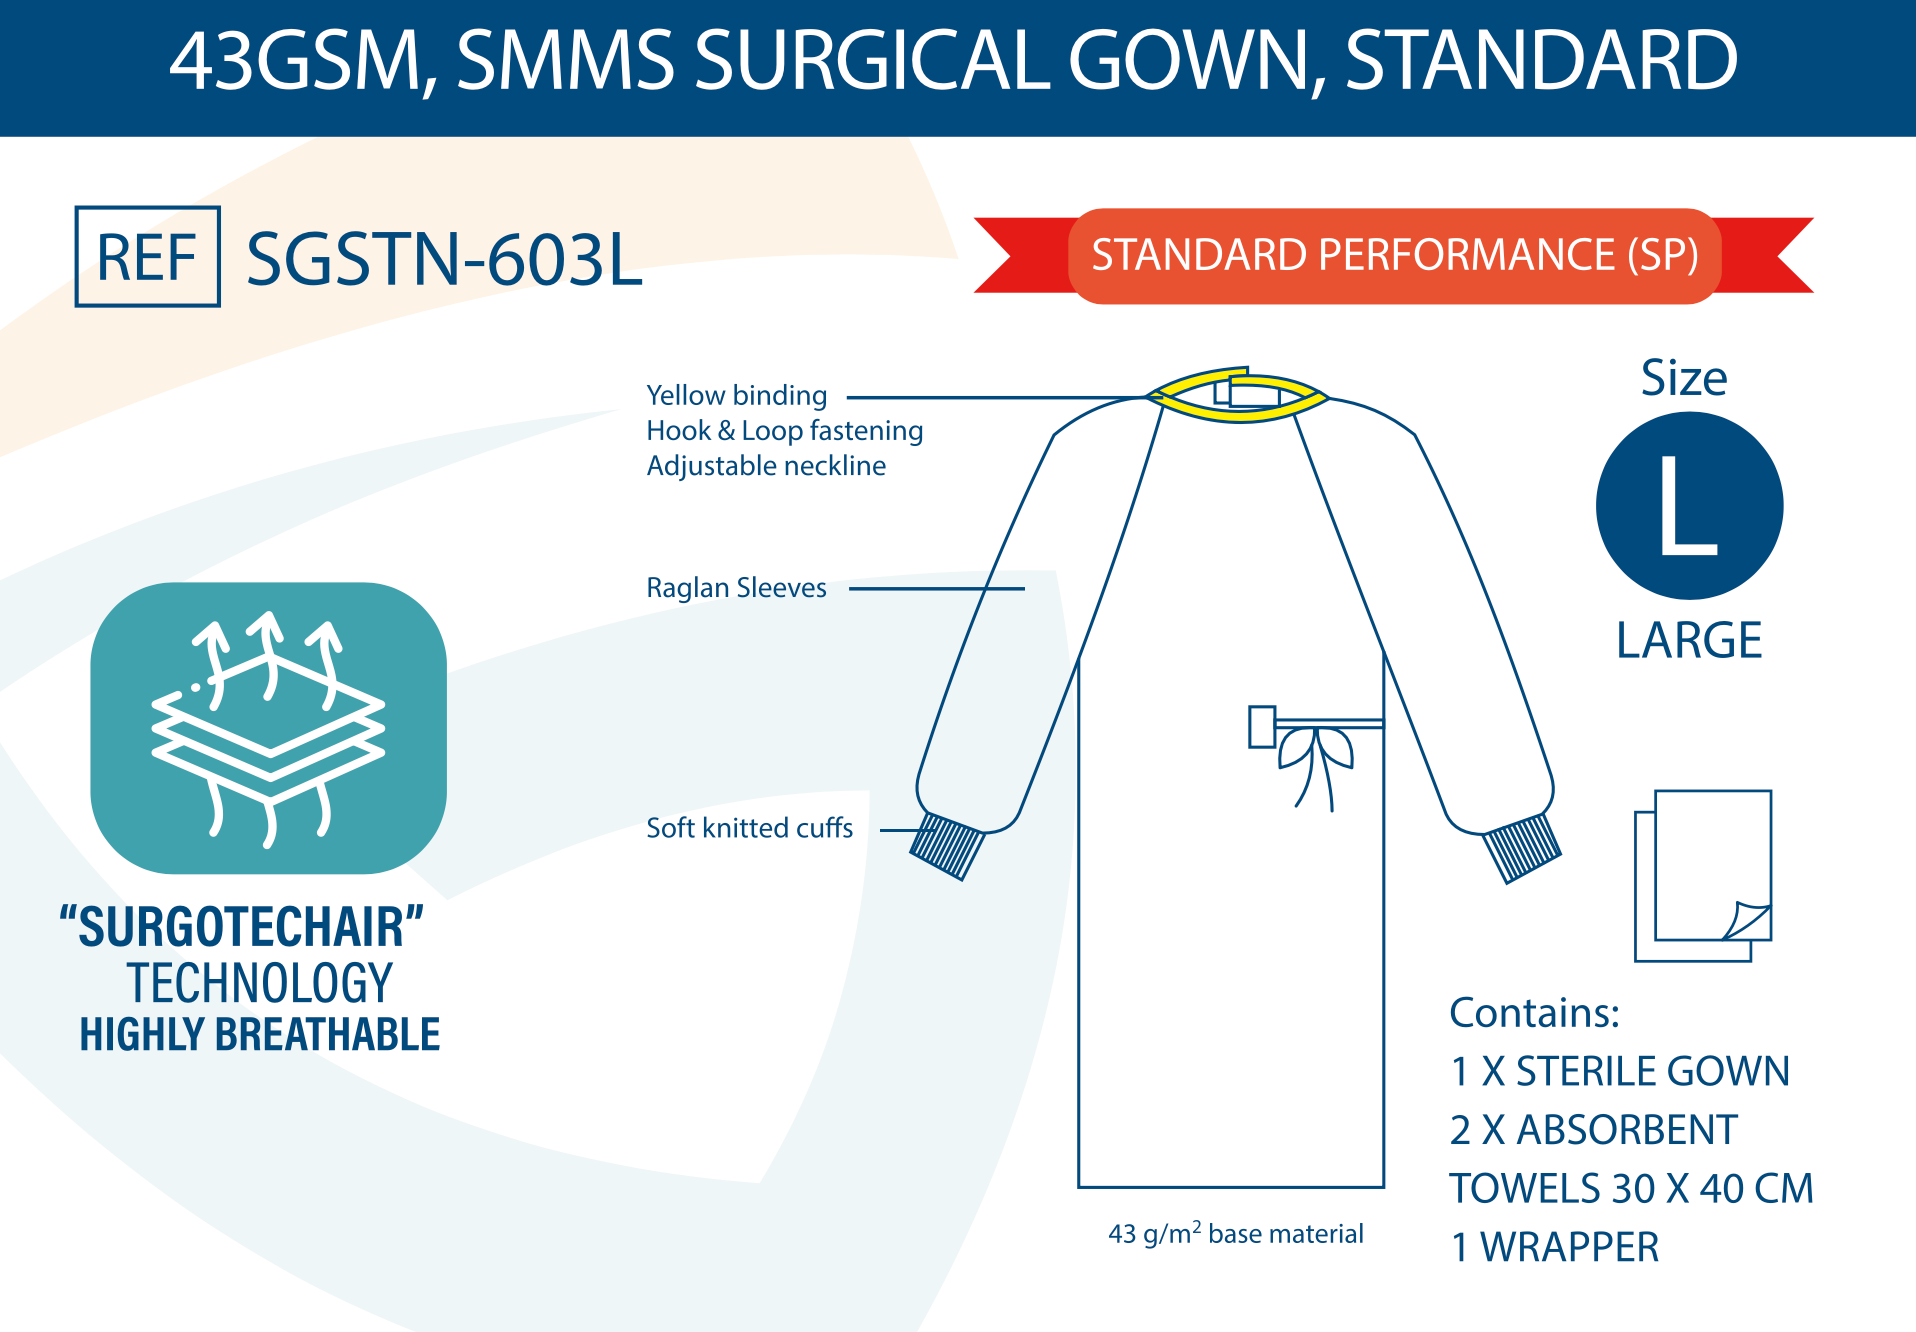 Case 40 Sterile Standard Surgical Gown 43Gsm SMMS Double Wrapped with 2 x hand towels 30 x 40 cm, hook-and-loop fastening Adjustable Neckline Velcro, Yellow Binding, Soft Knitted Cuffs, Raglan Sleeves Anti-Static Size Large L EN13795 Disposable